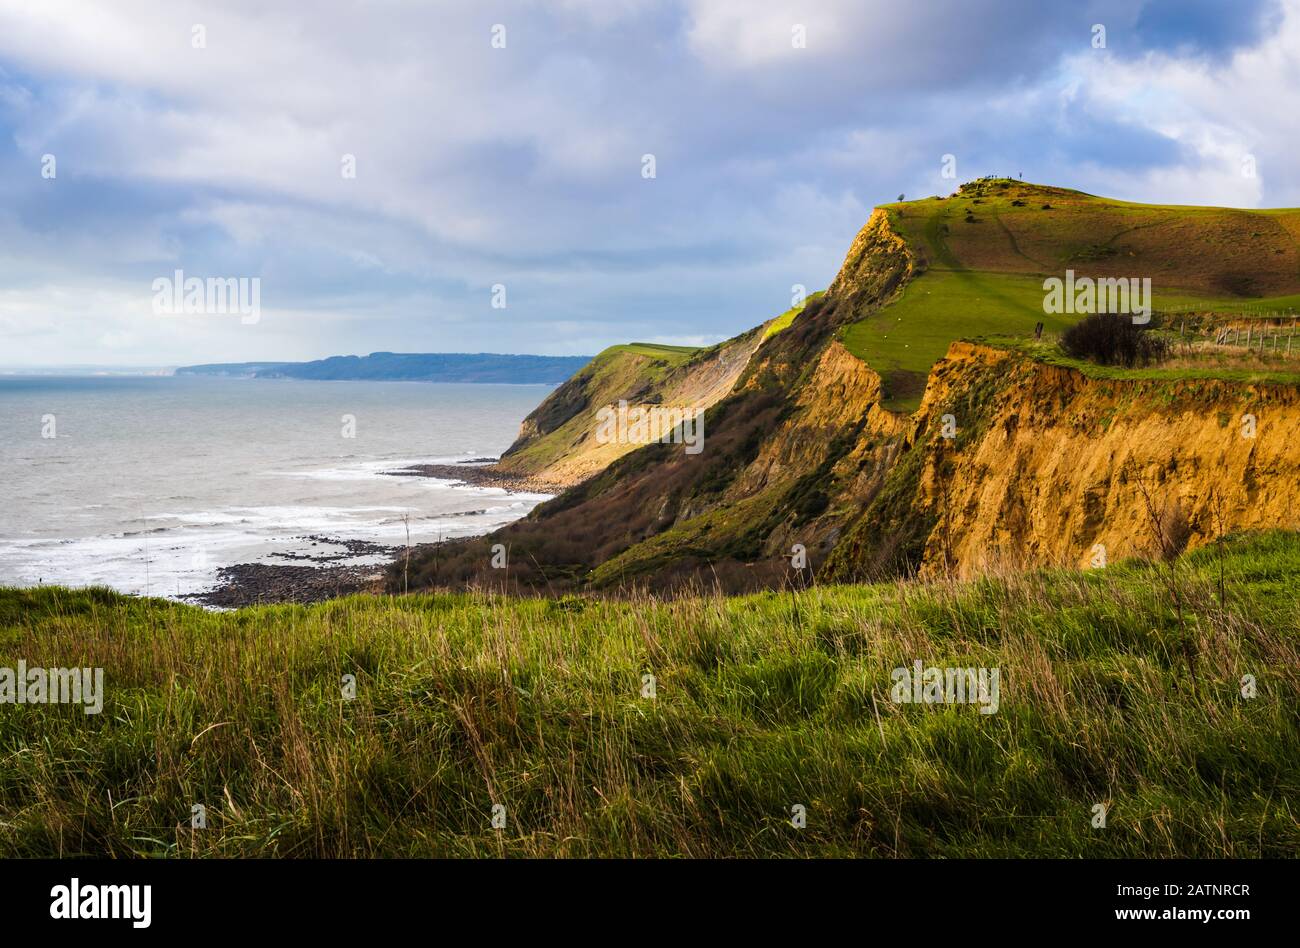 Thorncombe Beacon and the cliffs of the Dorset coast Stock Photo